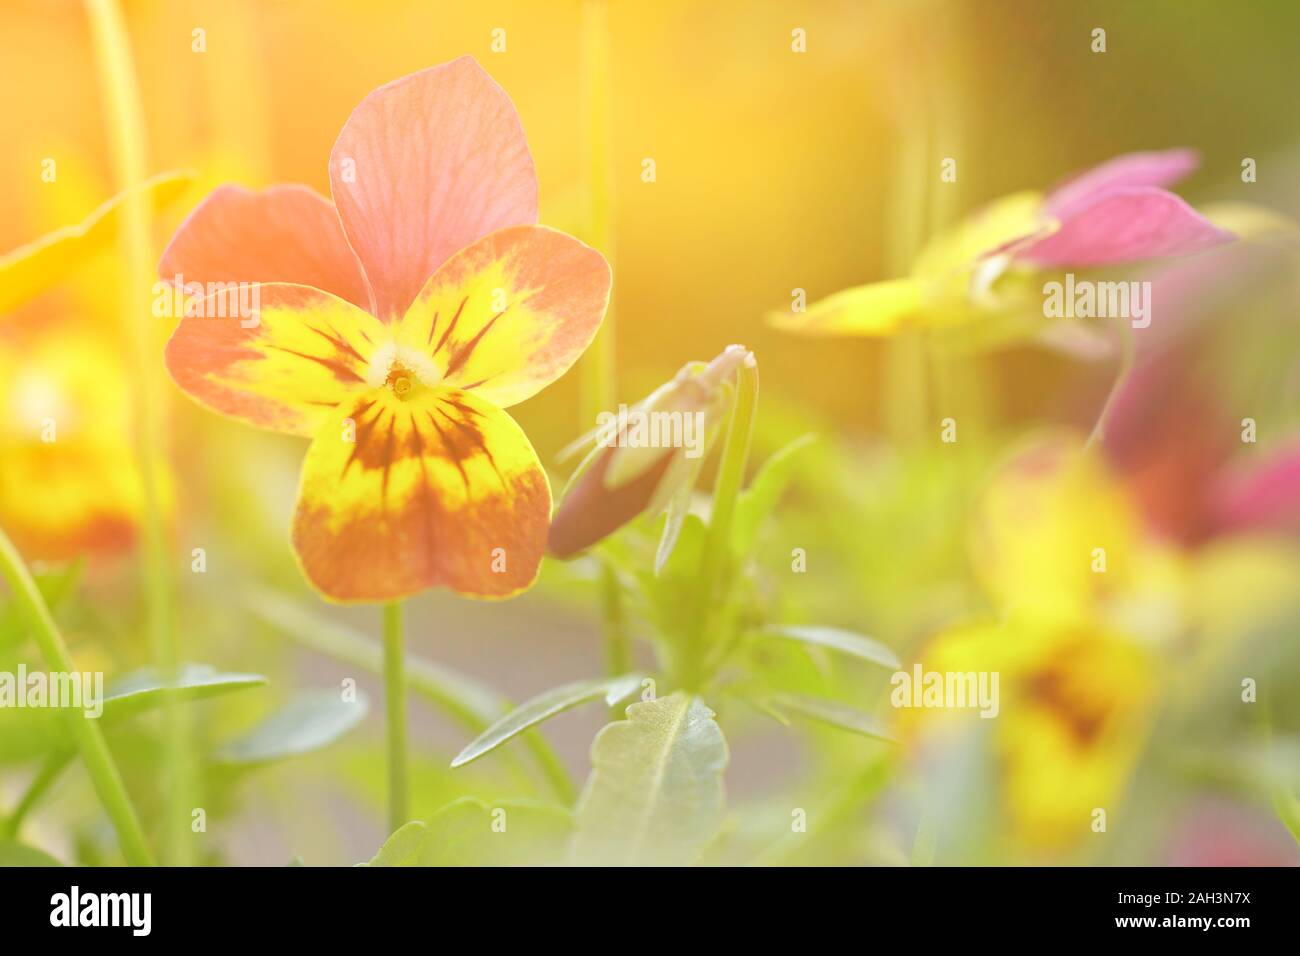 Close up of yellow and purple pansy flowers in bright sun light, vintage filter effect Stock Photo